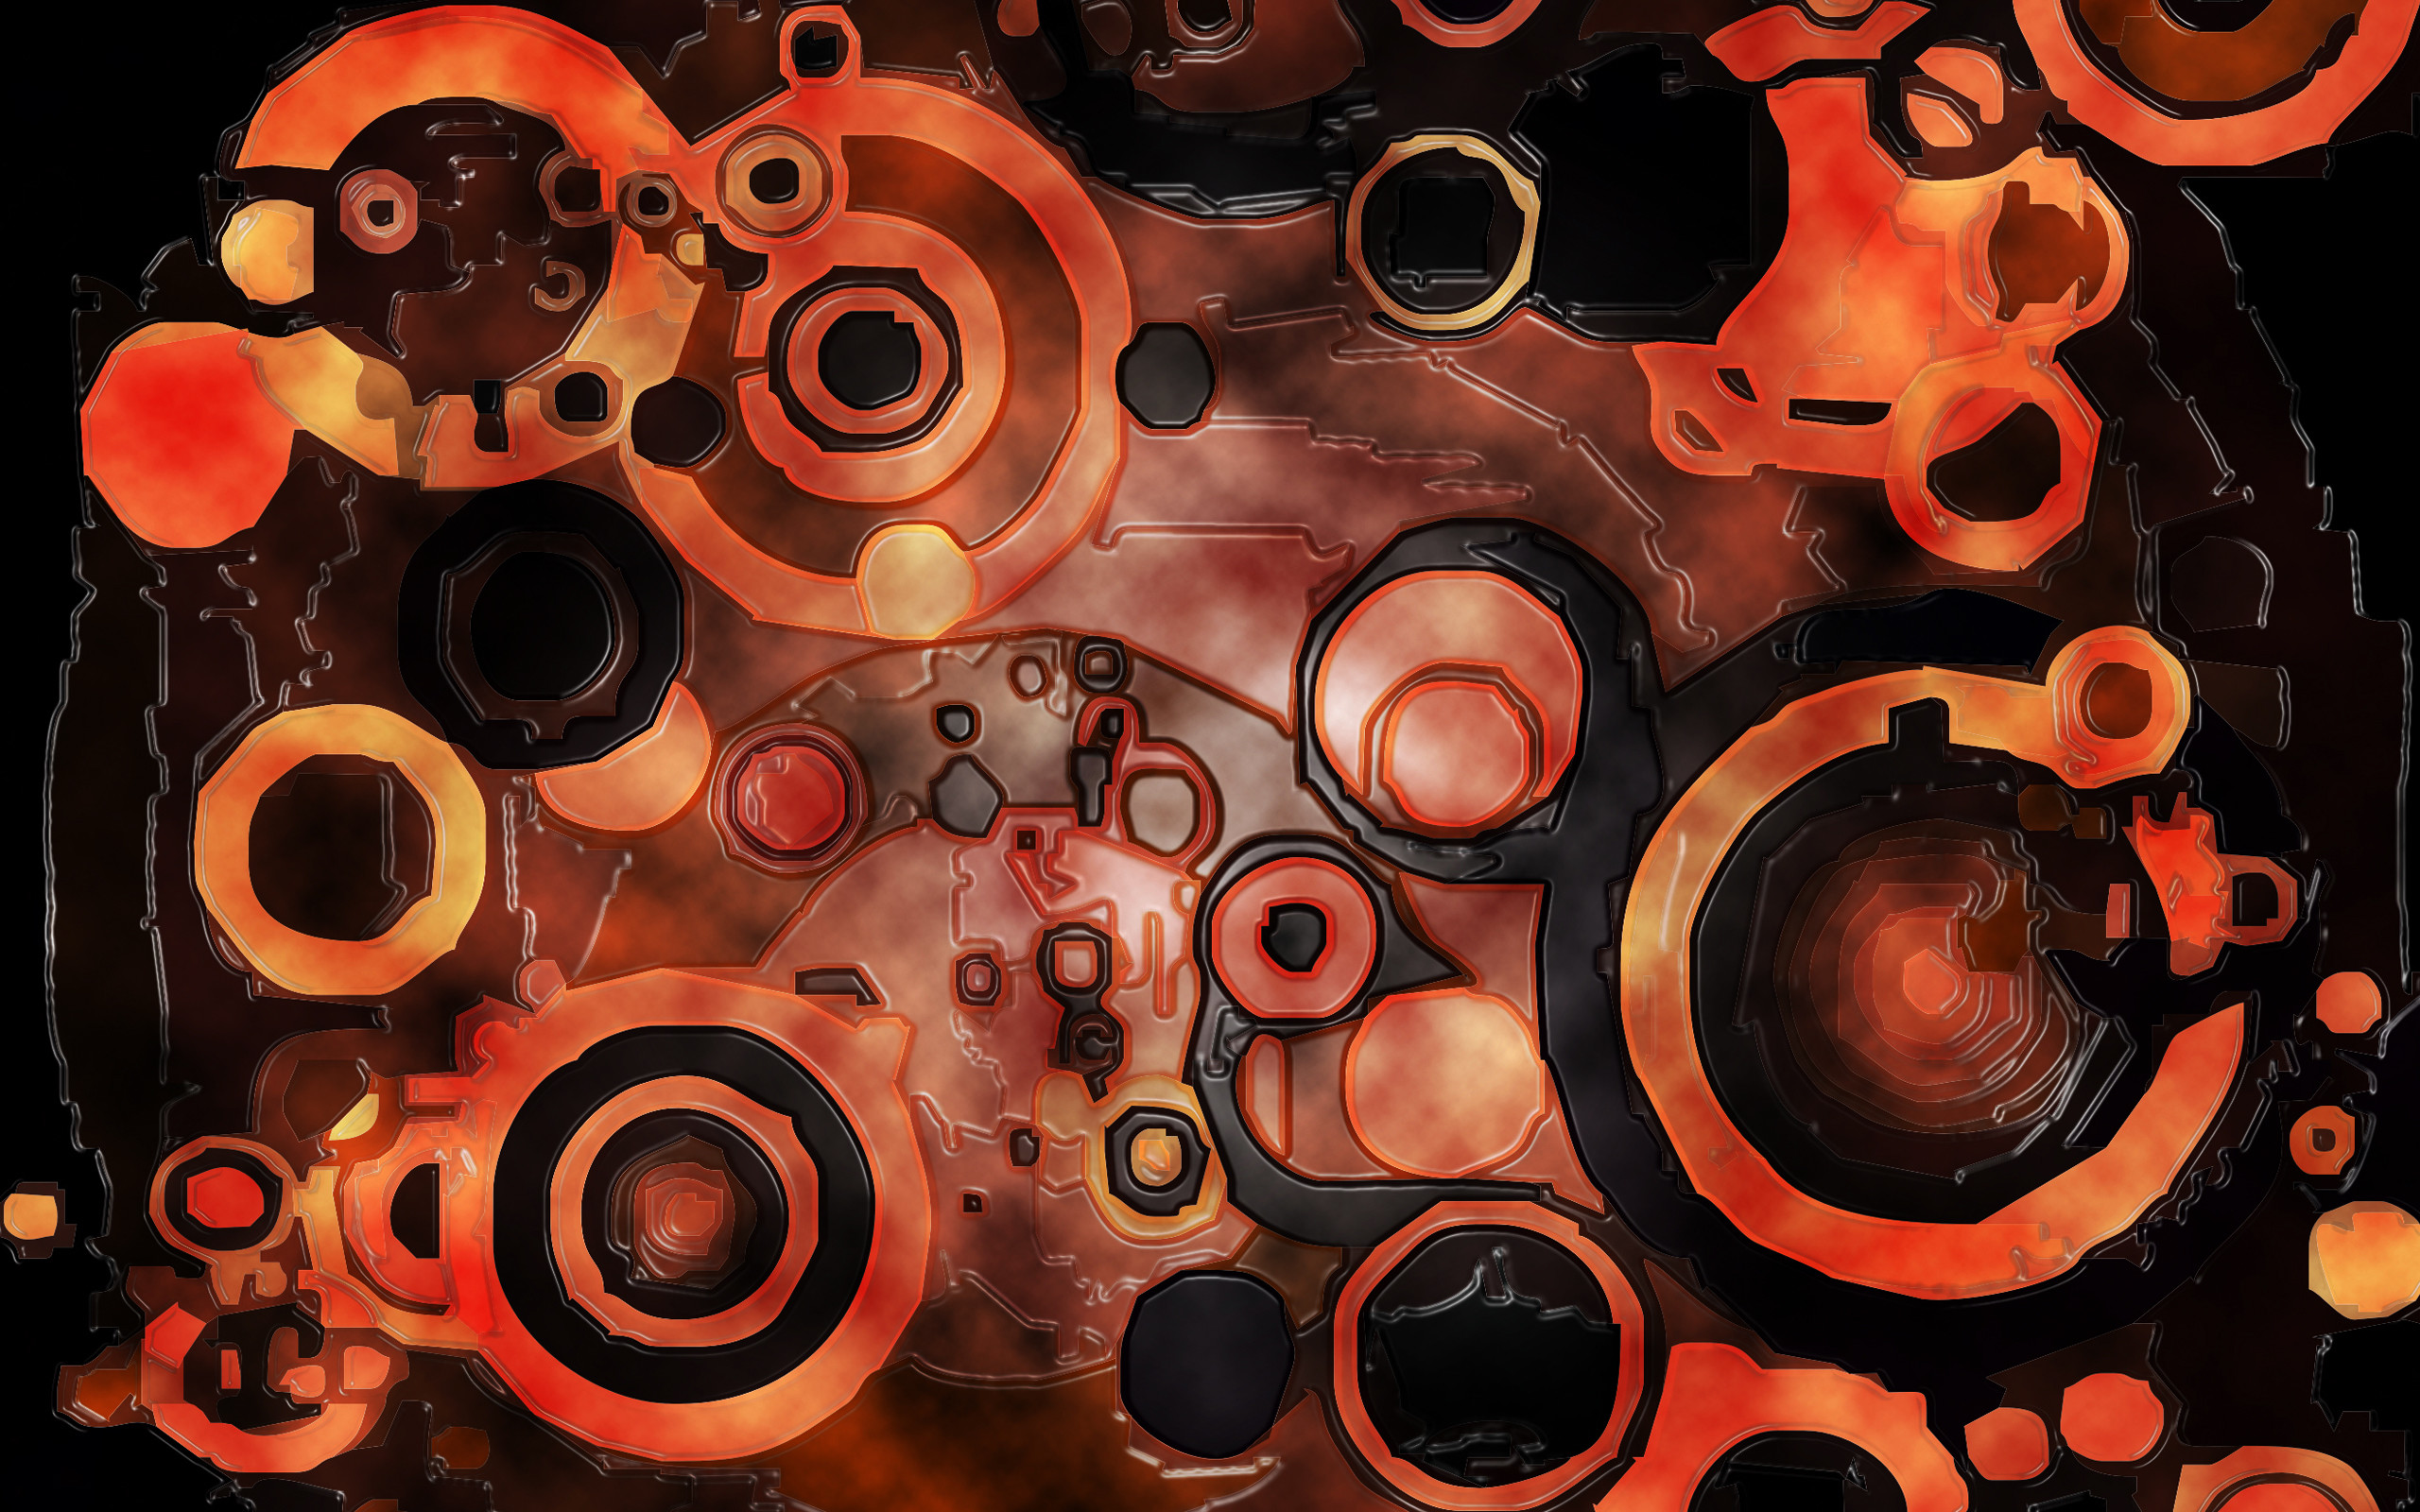 Abstract 3D Artistic Wallpaper in Orange and Black